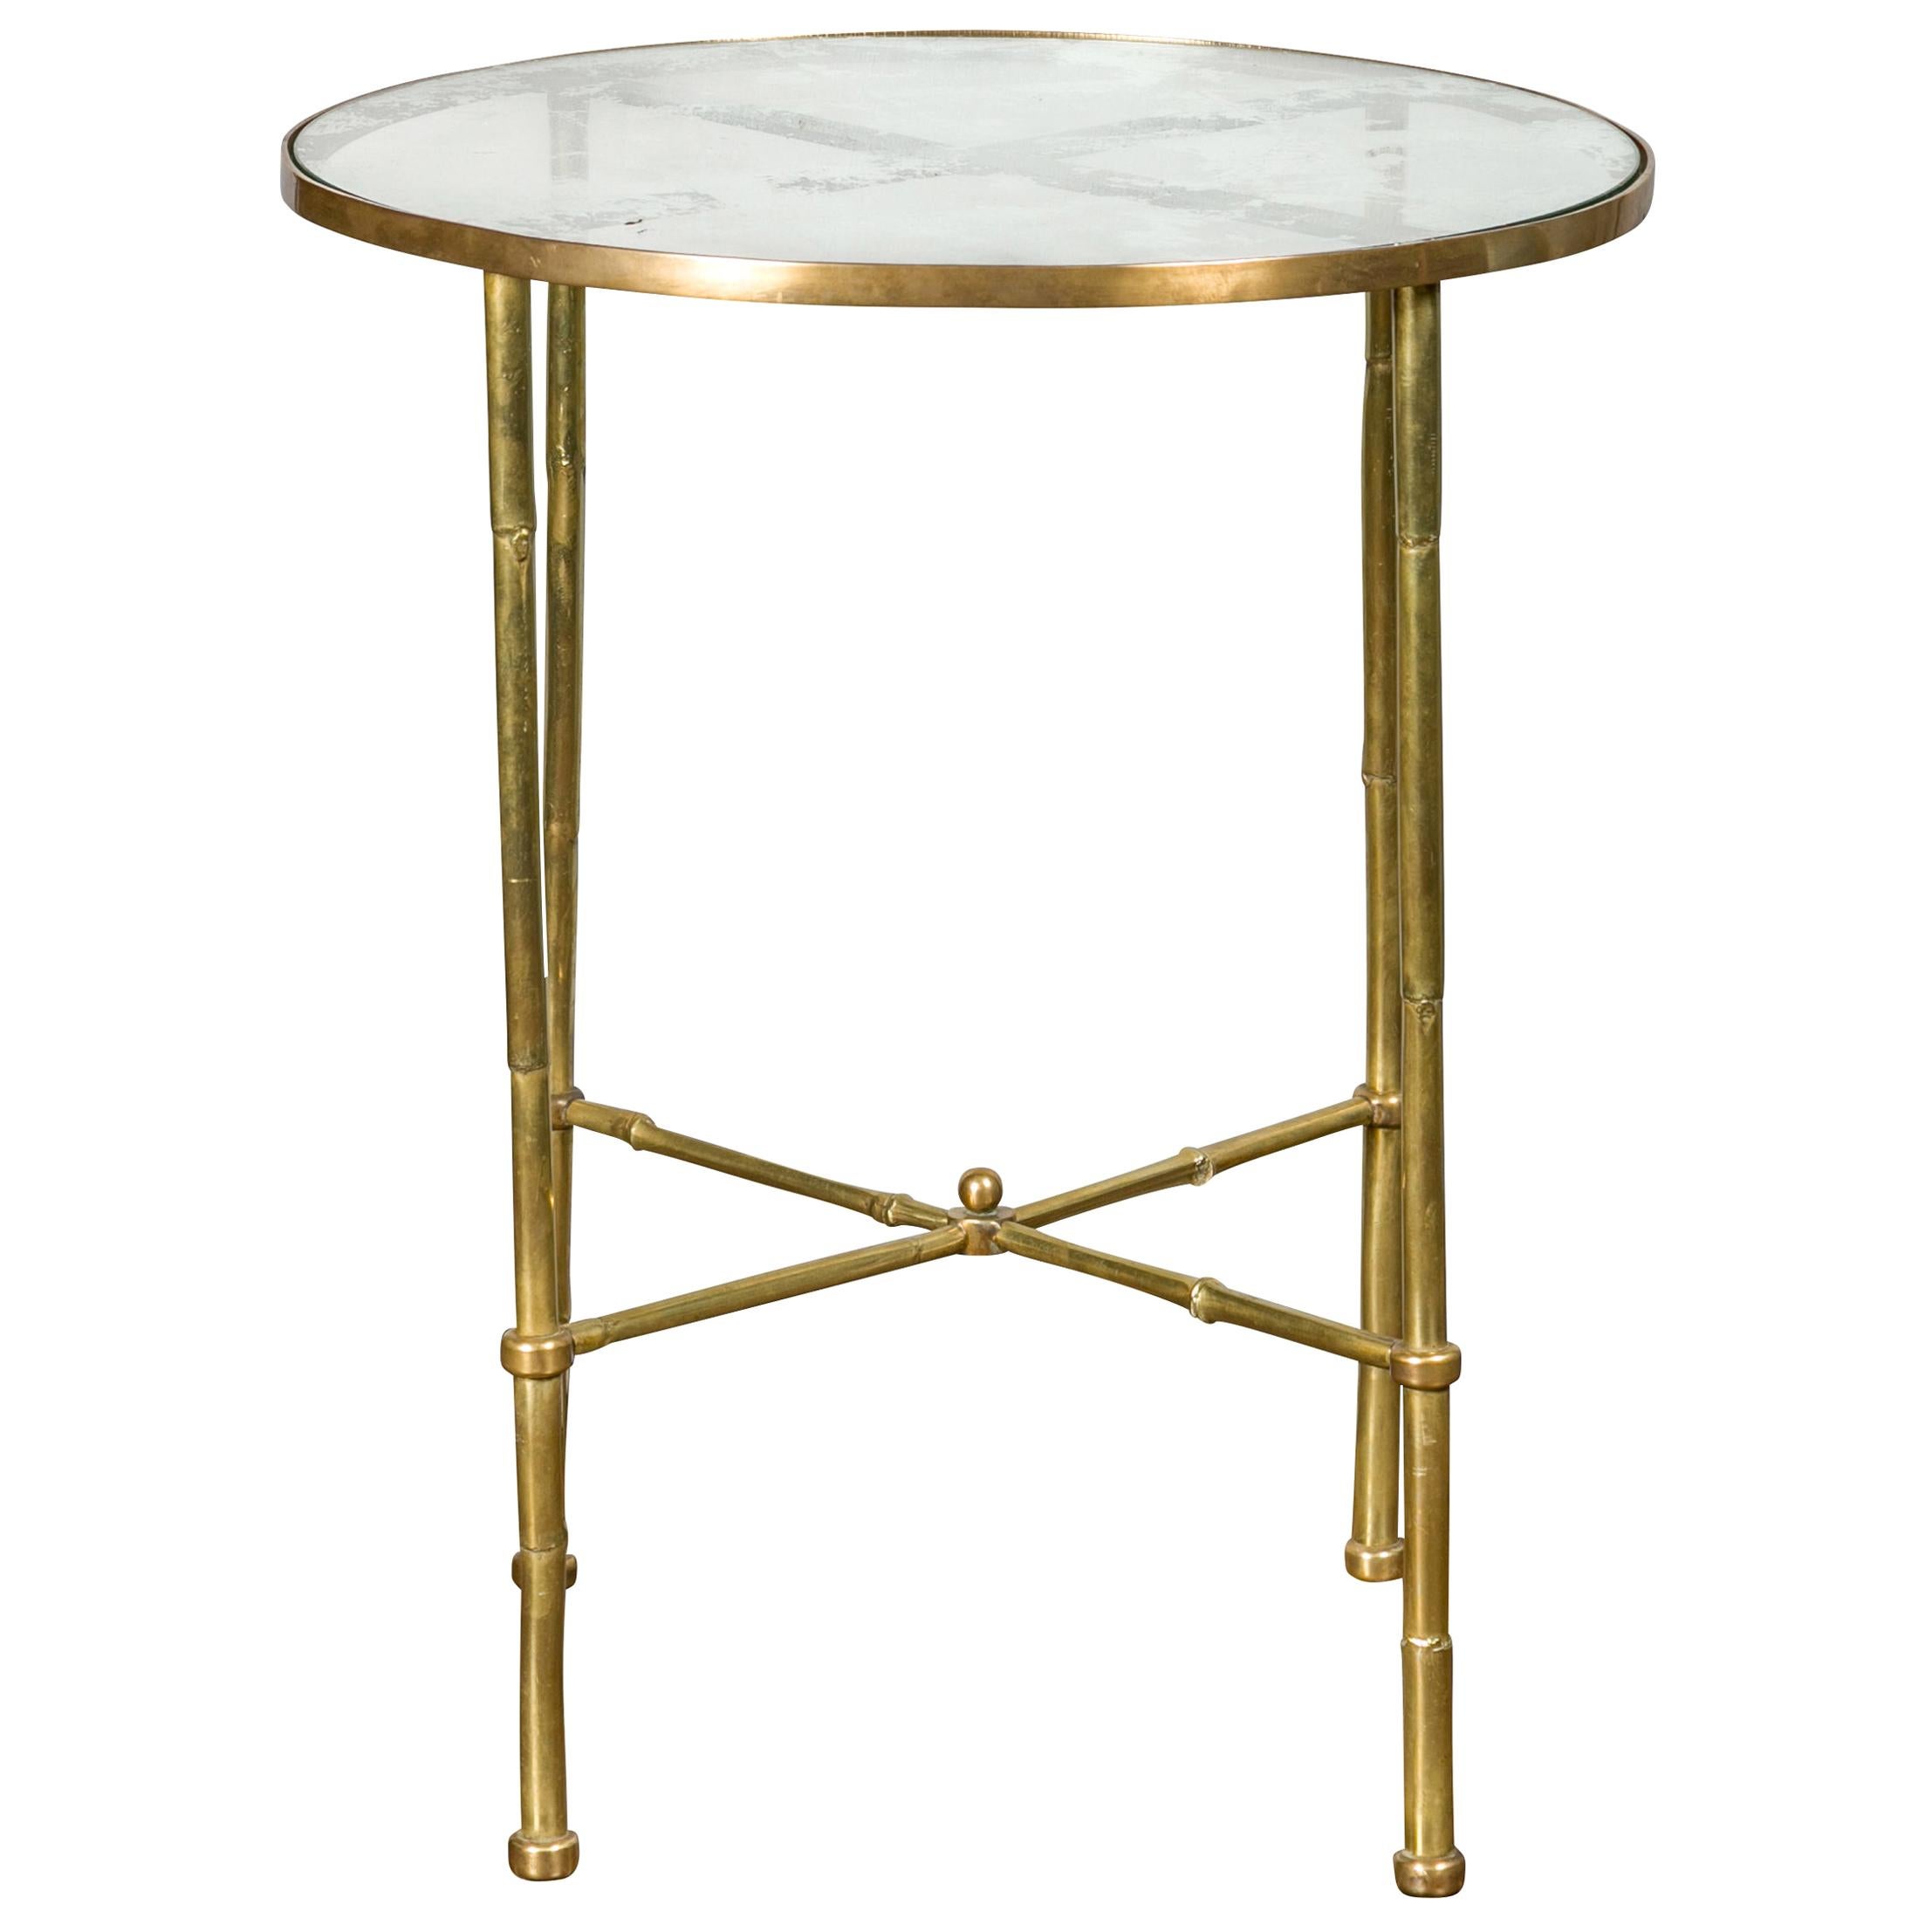 Italian Midcentury Brass Bamboo-Inspired Side Table with Distressed Glass Top